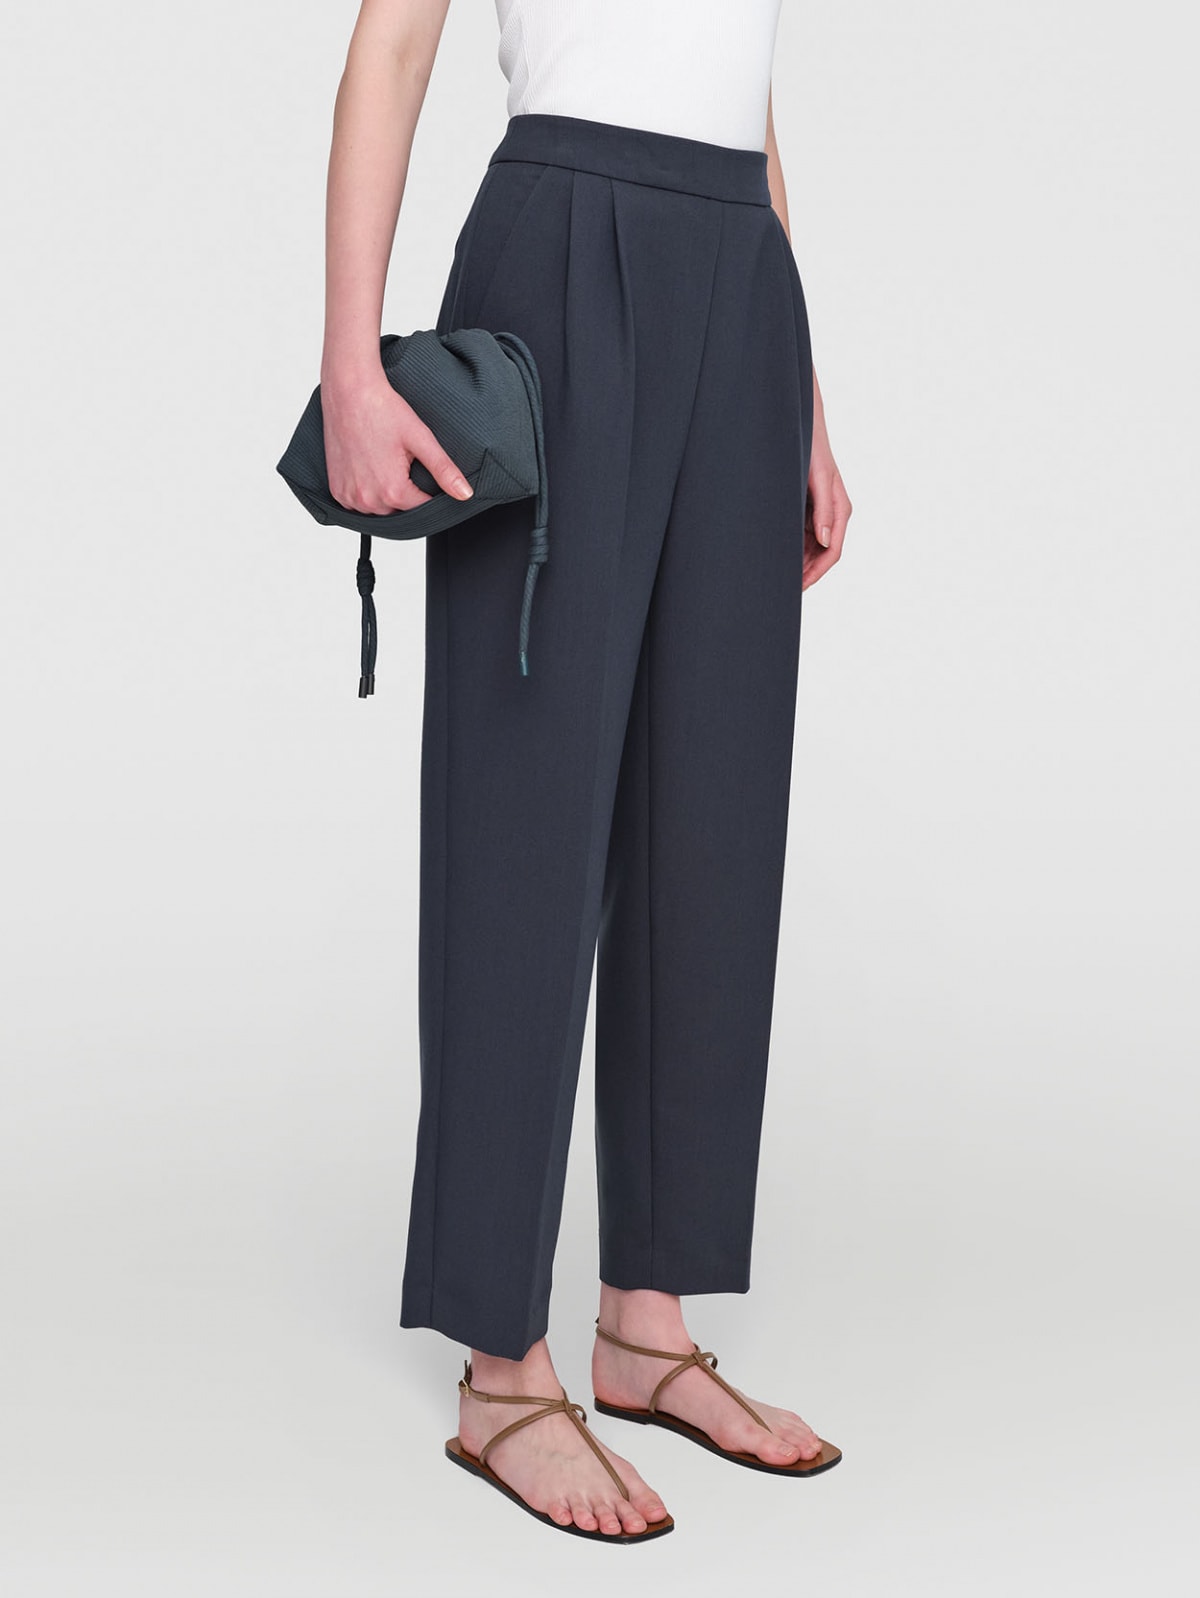 Summer Suiting  Pippa  Crop Pants  2